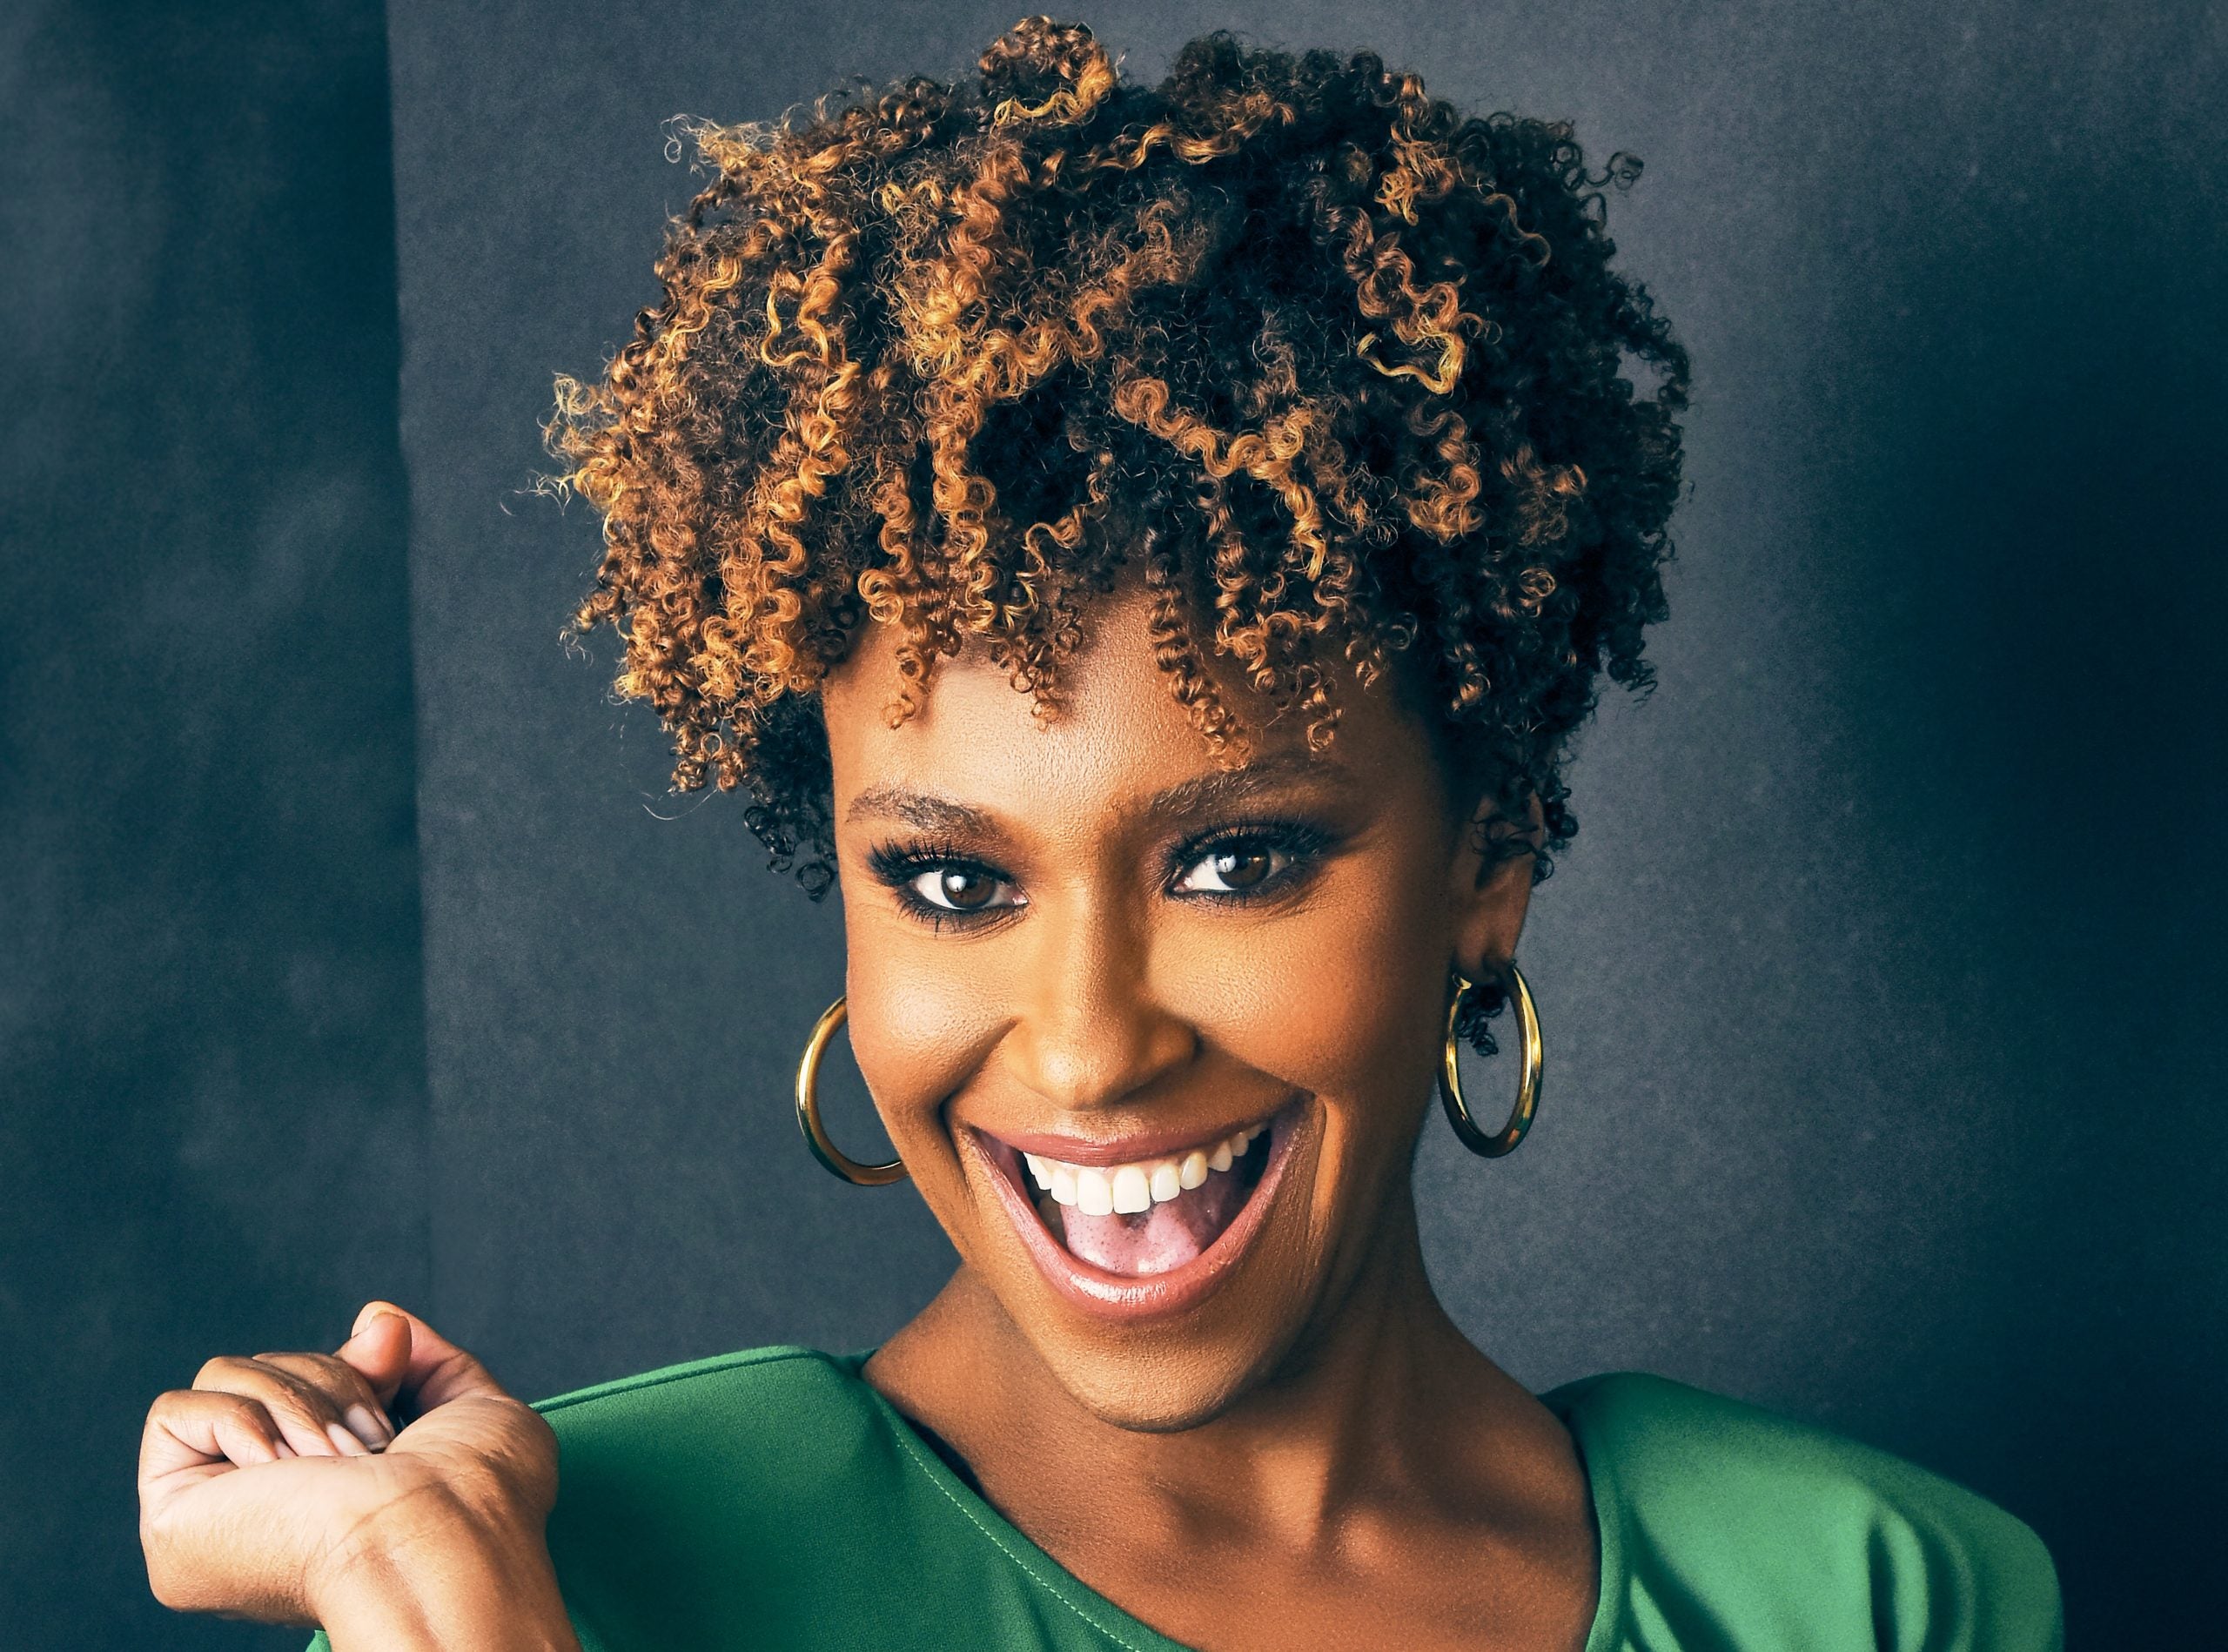 Ryan Michelle Bathé Gets Real About Juggling Family And The Hollywood Hustle